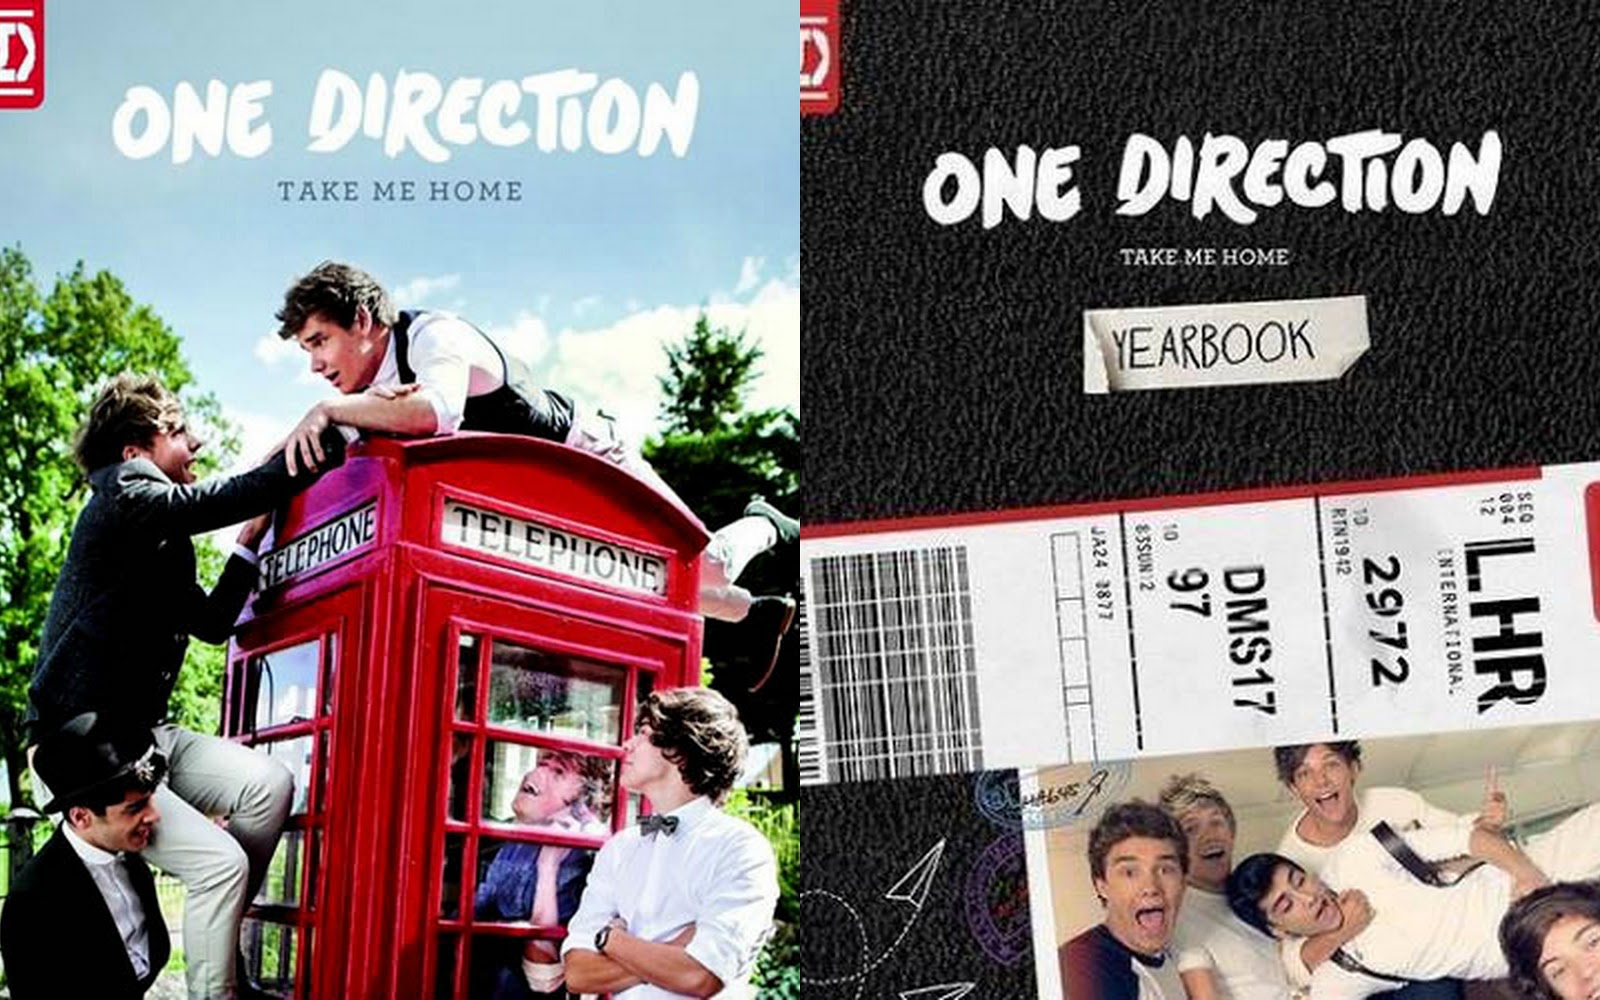 One Direction Take Me Home Yearbook Edition Album Mp3 Download.